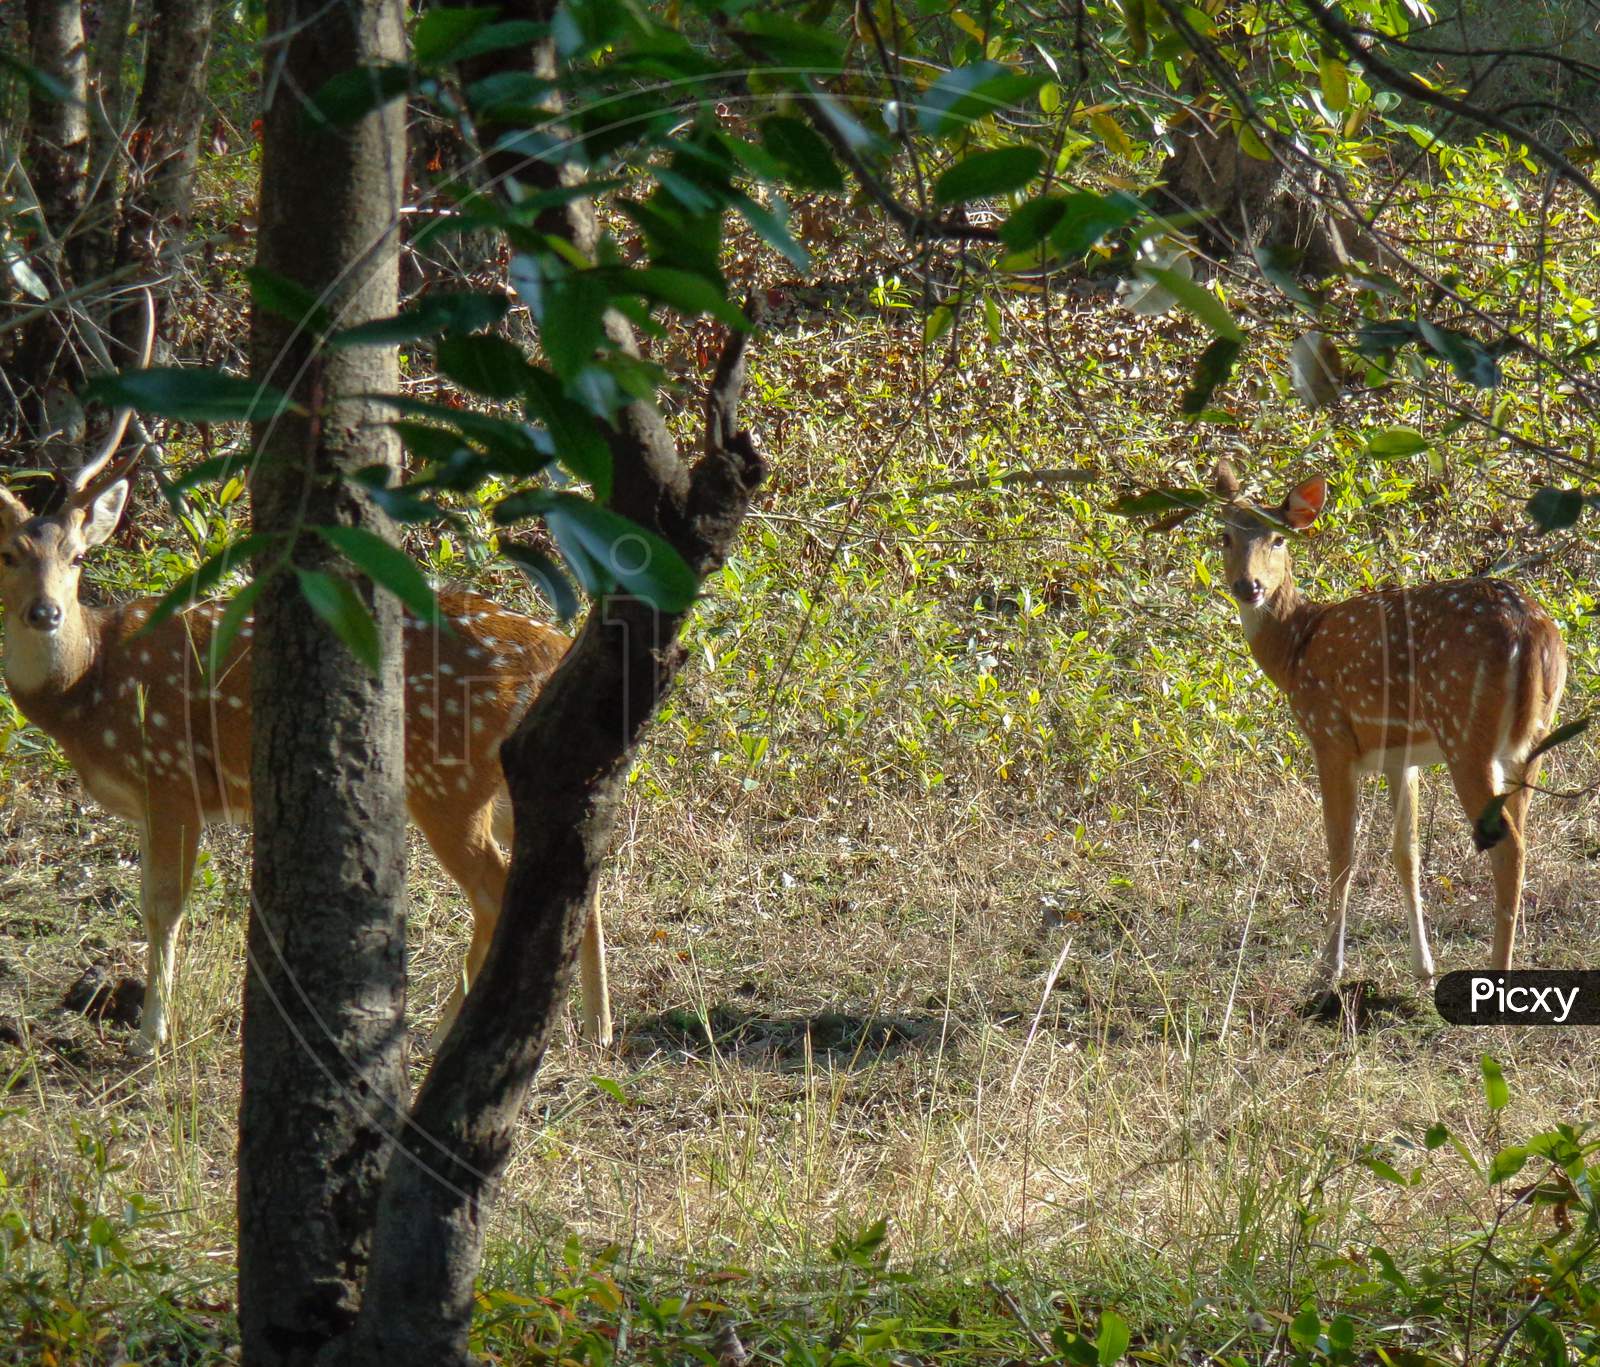 Chital Or Cheetal, Also Known As Spotted Deer At Bandhavgarh National Park, India